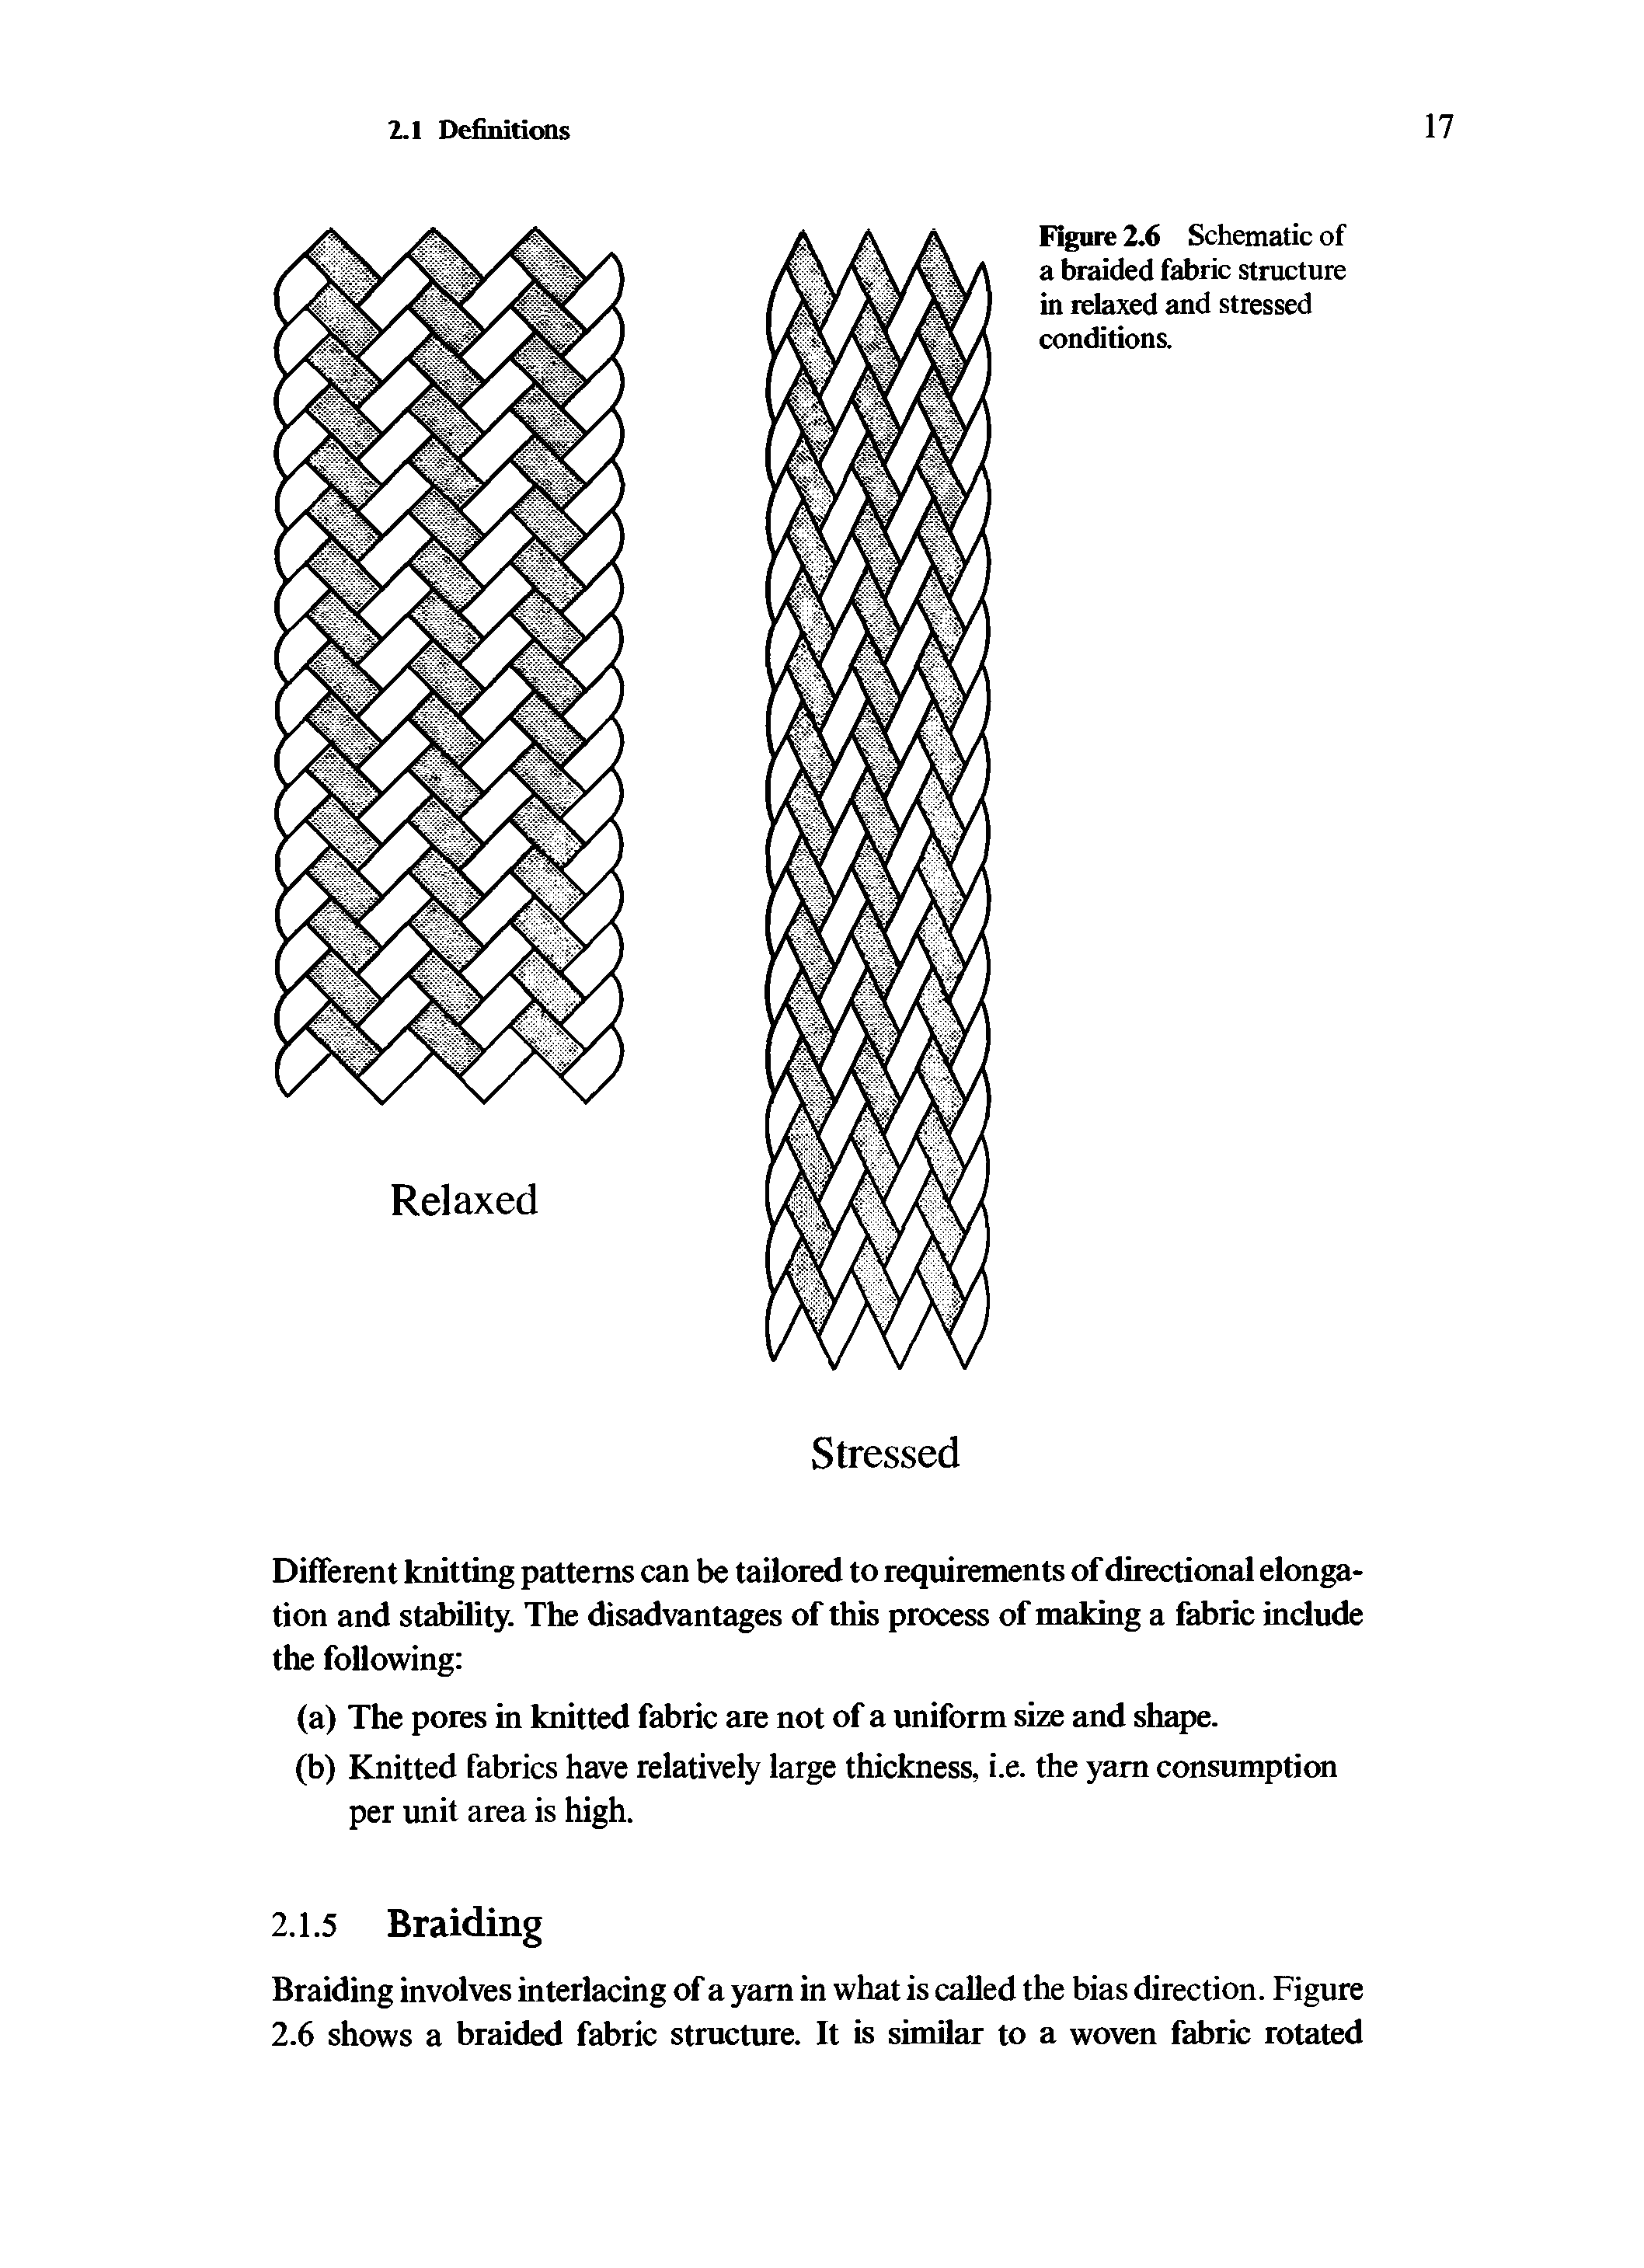 Figure 2.6 Schematic of a braided fabric structure in relaxed and stressed conditions.